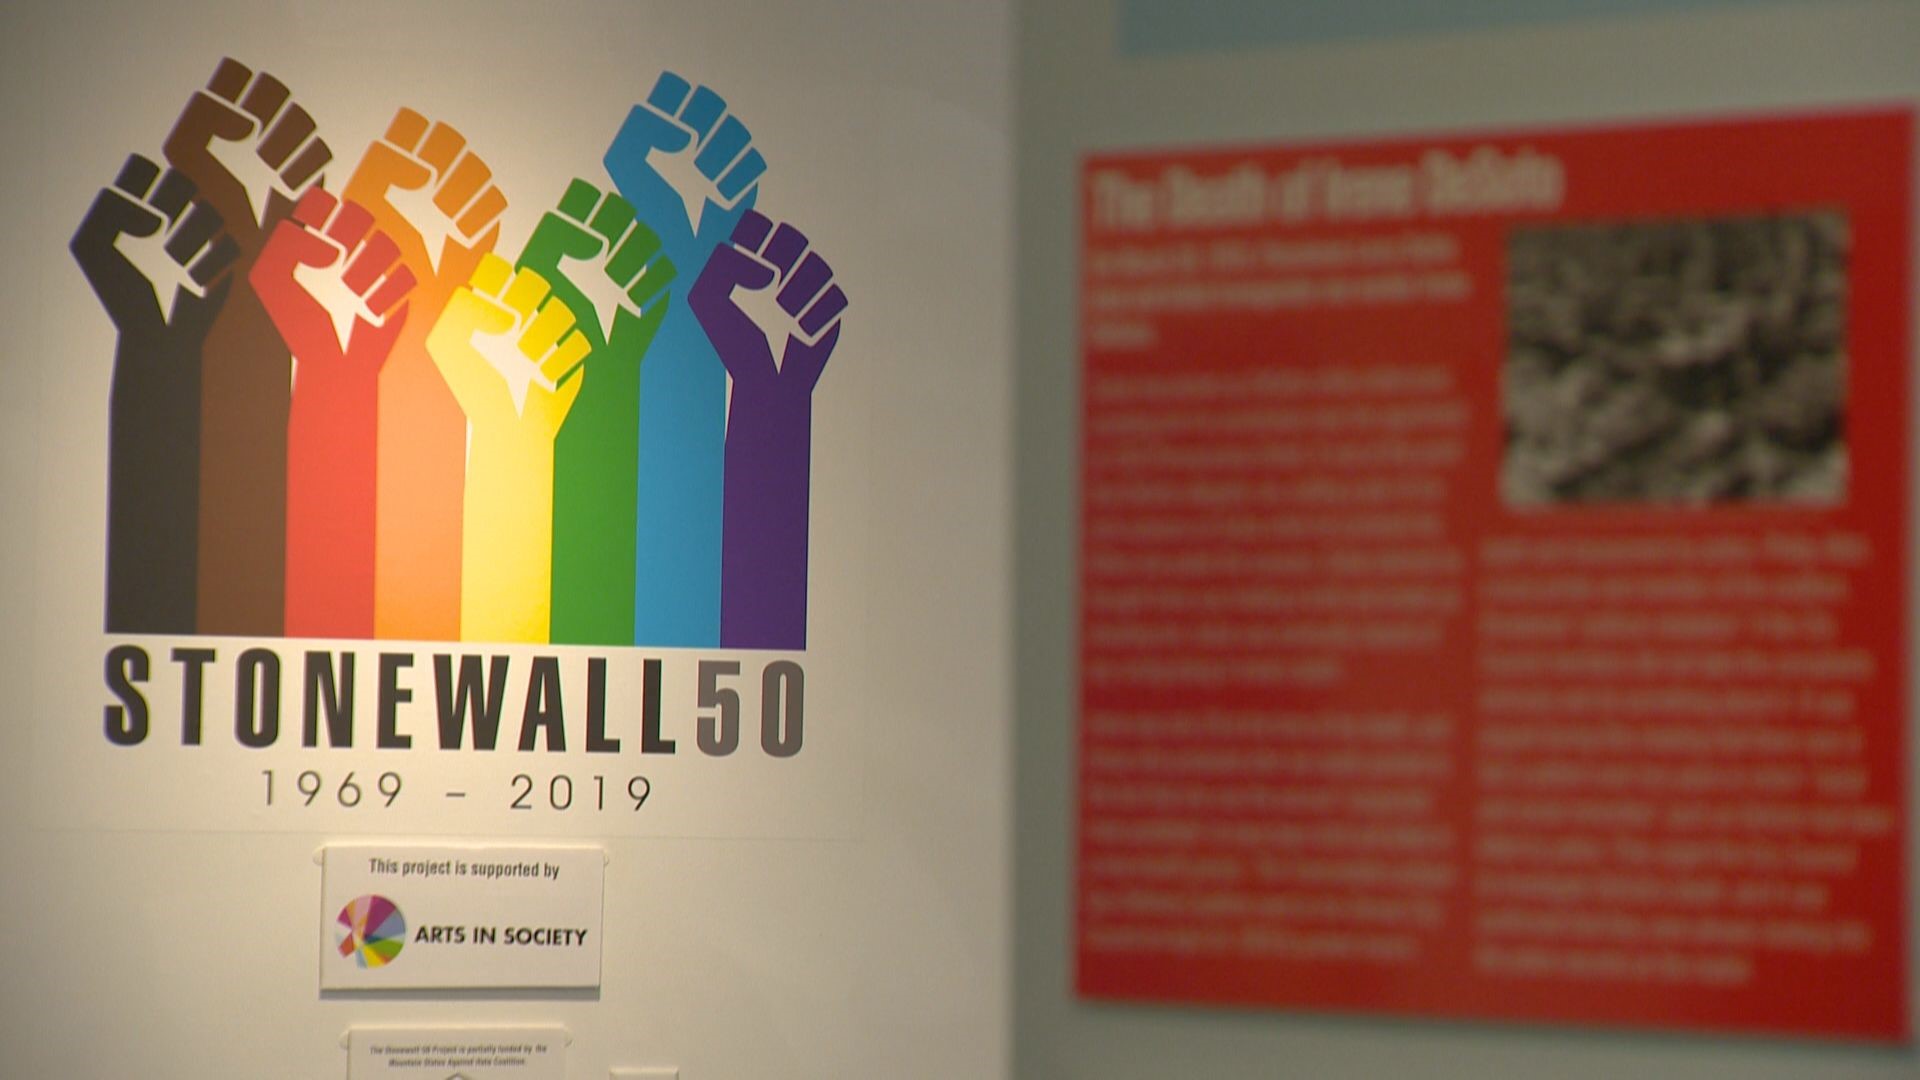 In honor of the 50th anniversary of the Stonewall Uprising, the Center on Colfax has had an exhibit explaining its place in LGBTQ history.